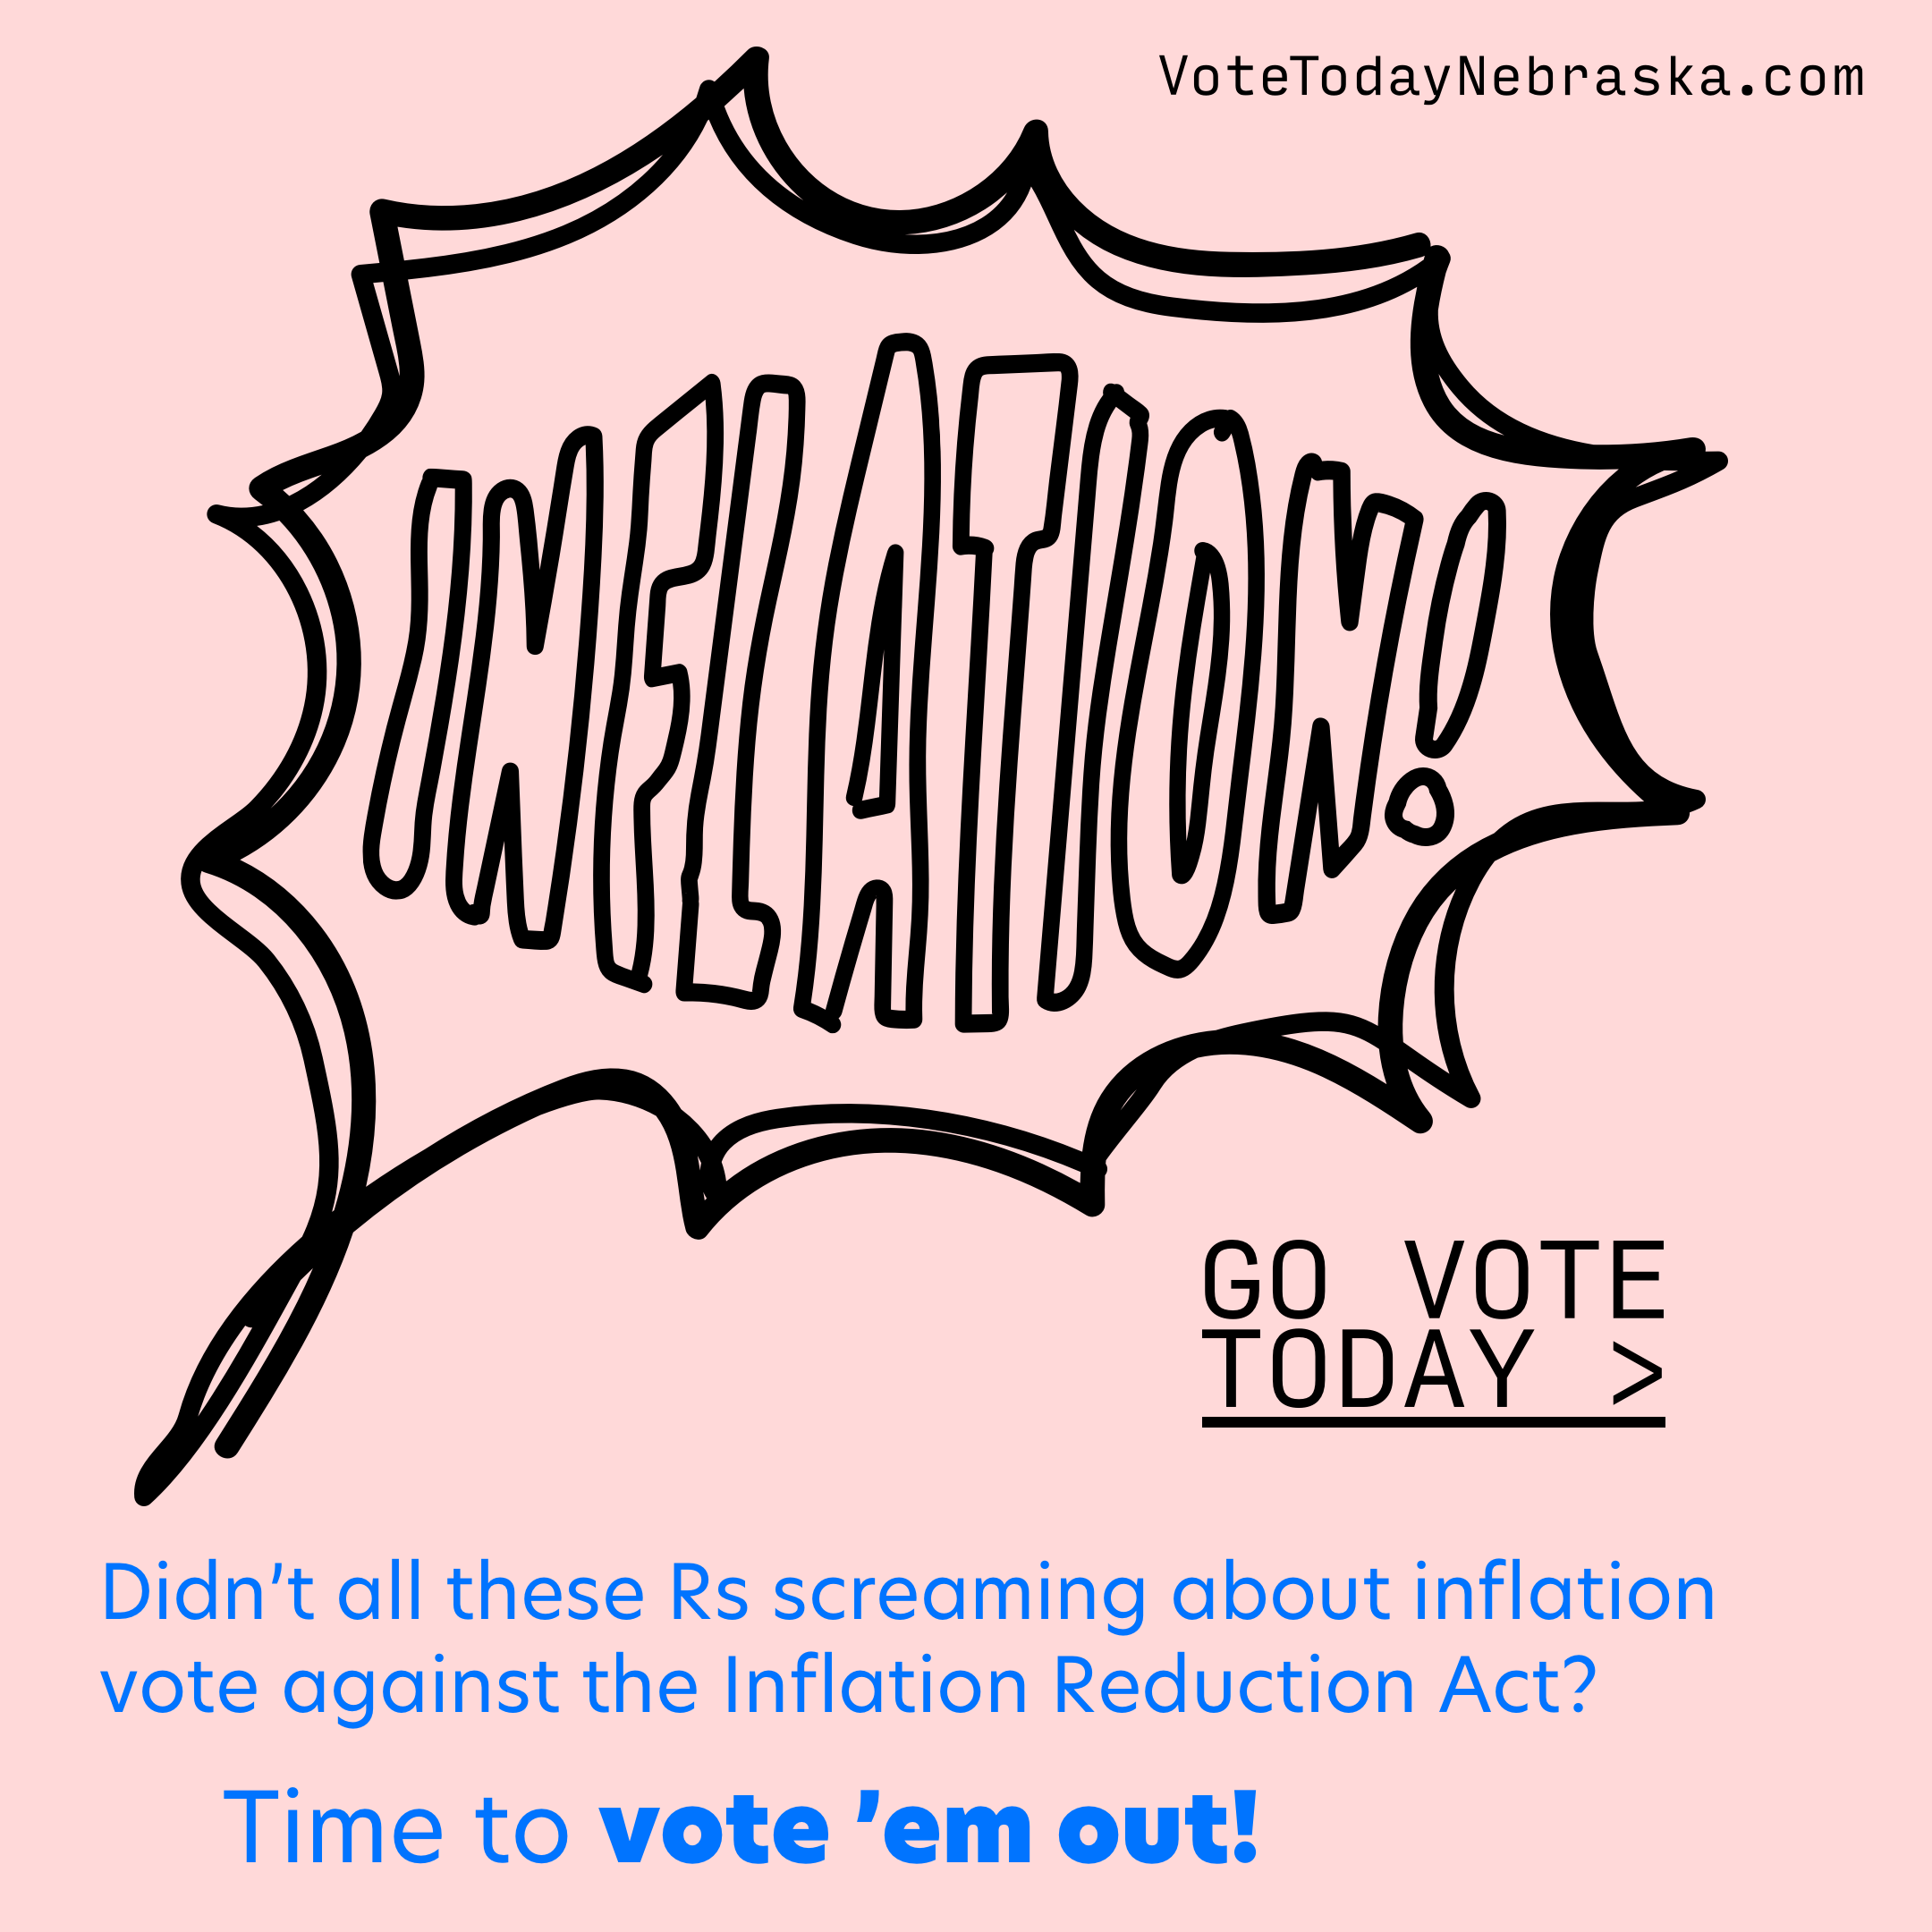 INFLATION!!! Didn't all these Rs screaming about inflation vote against the Inflation Reduction Act? Time to vote 'em out! Go Vote Today >